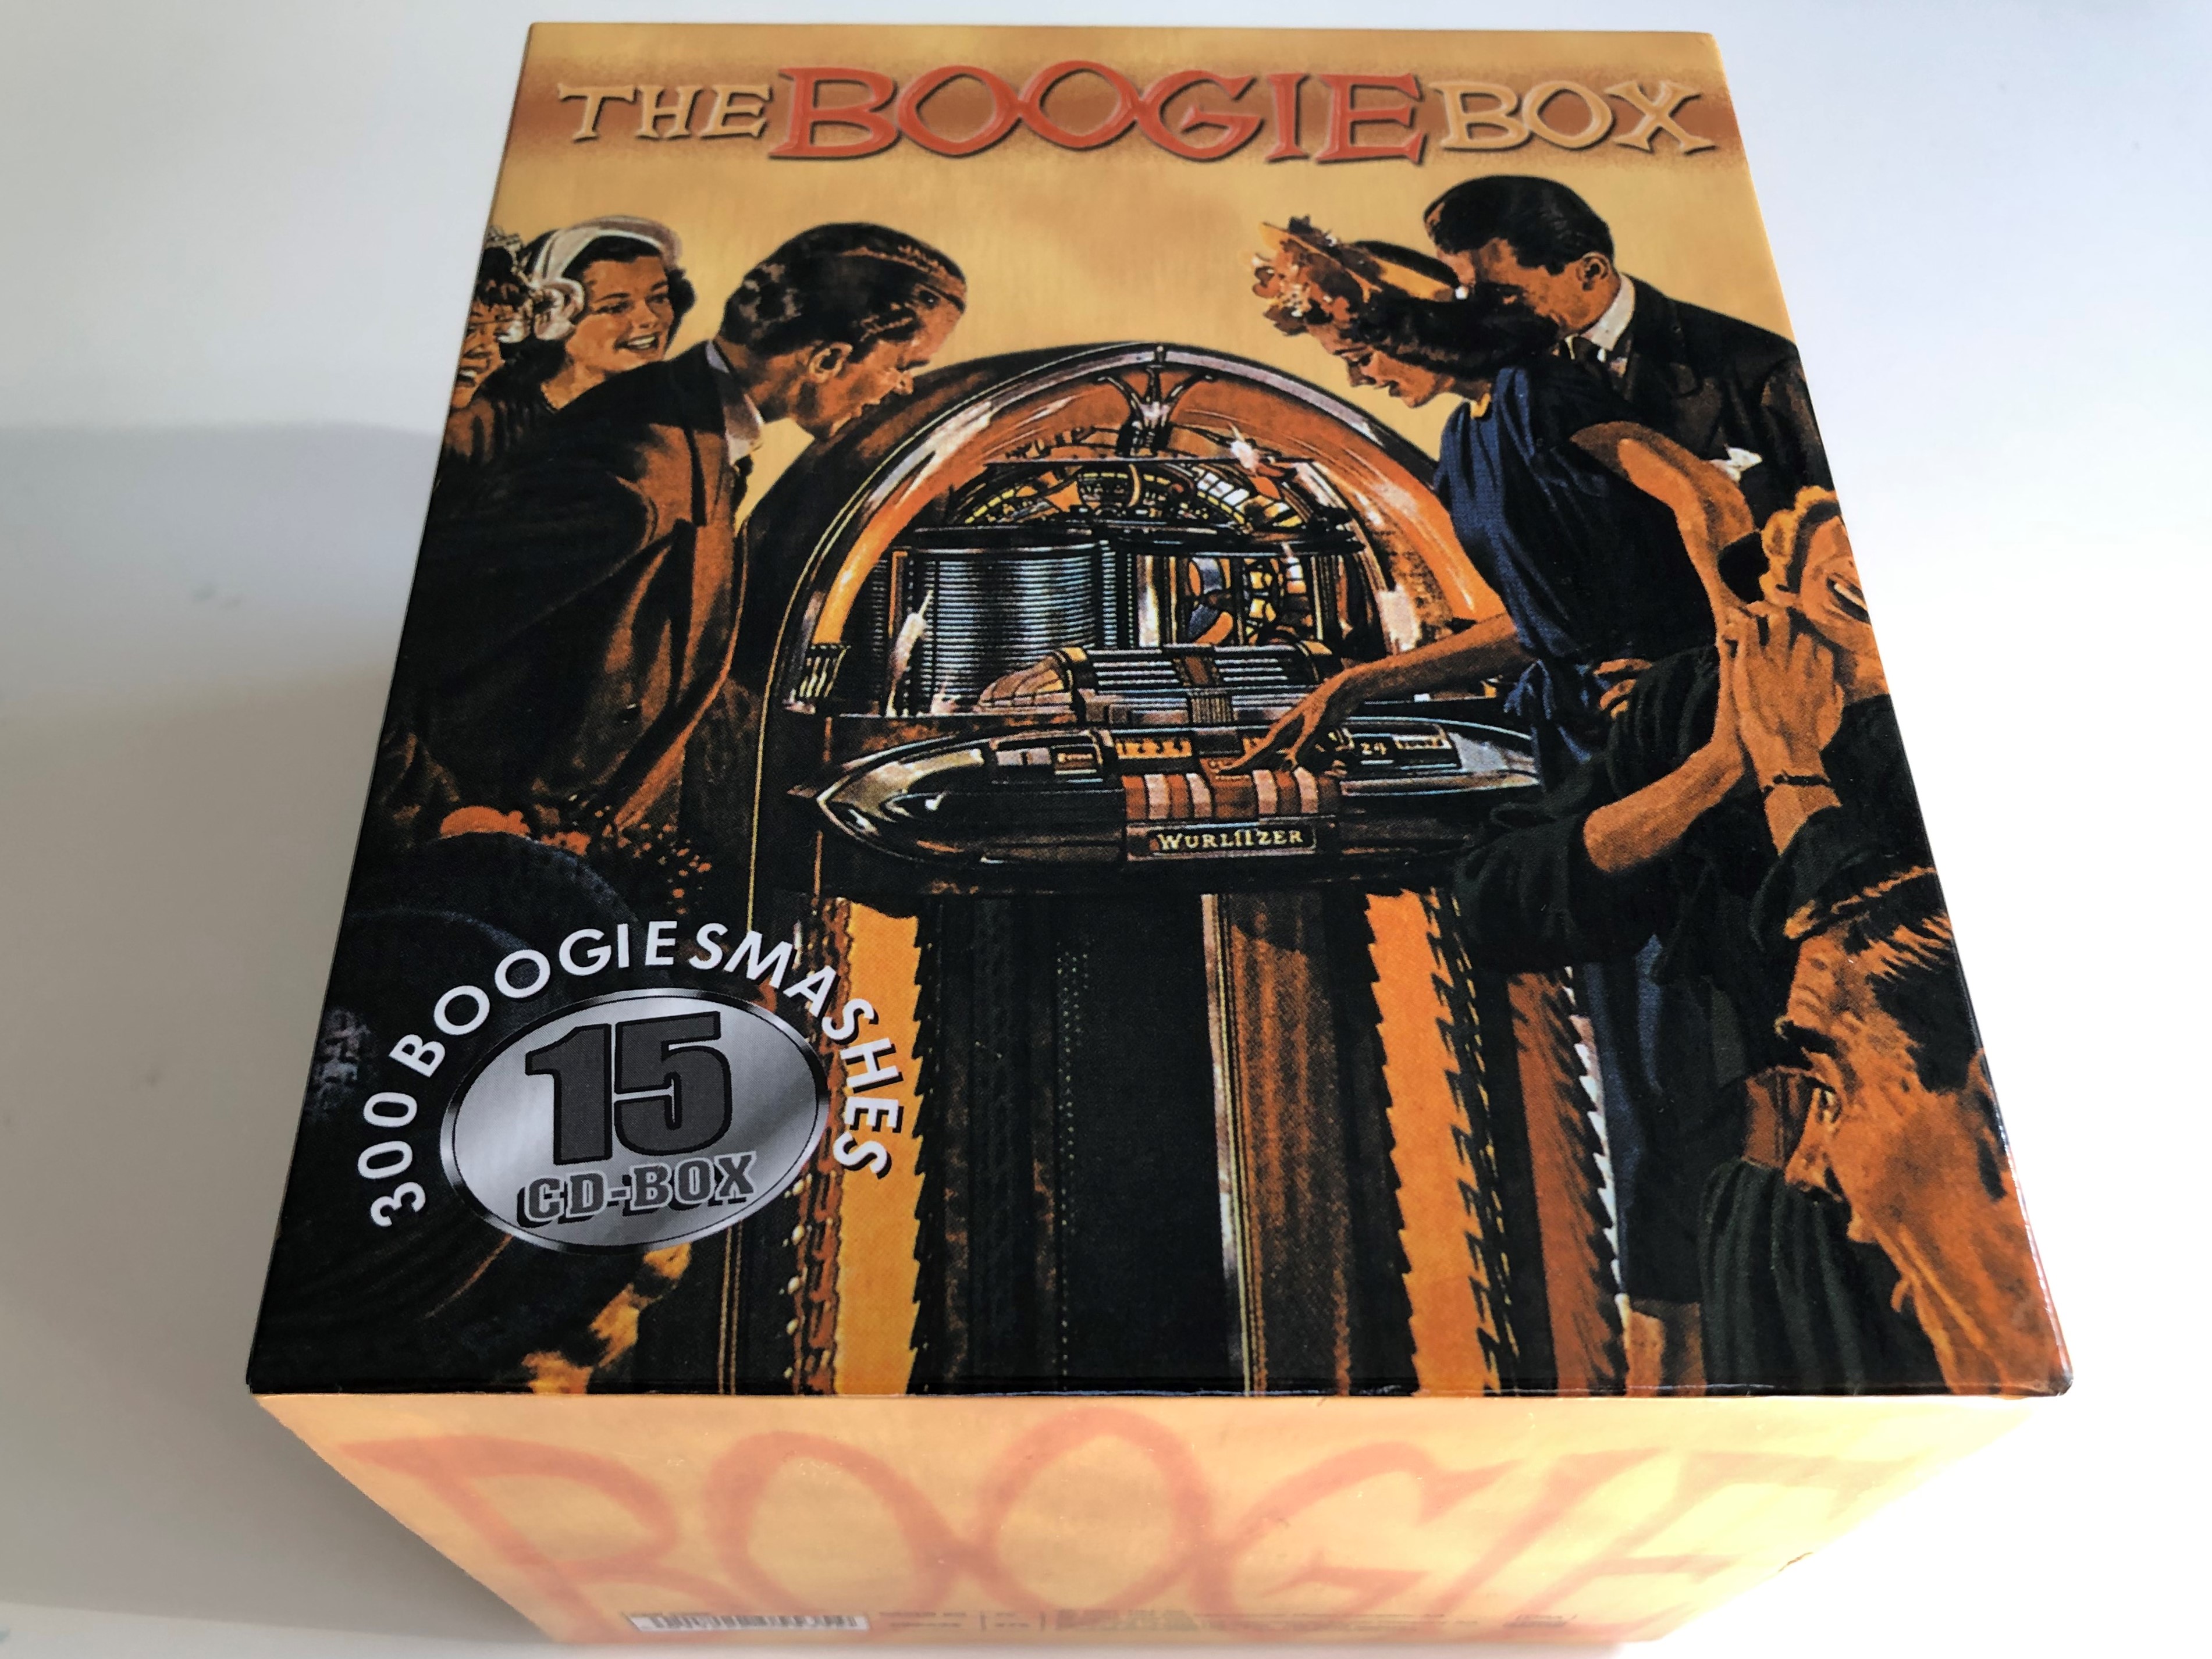 the-boogie-box-300-boogie-smashes-15-cd-box-300-tracks-each-track-includes-the-word-boogie-or-boogie-woogie-tim-cz-15x-audio-cd-box-set-2001-205535-375-1-.jpg